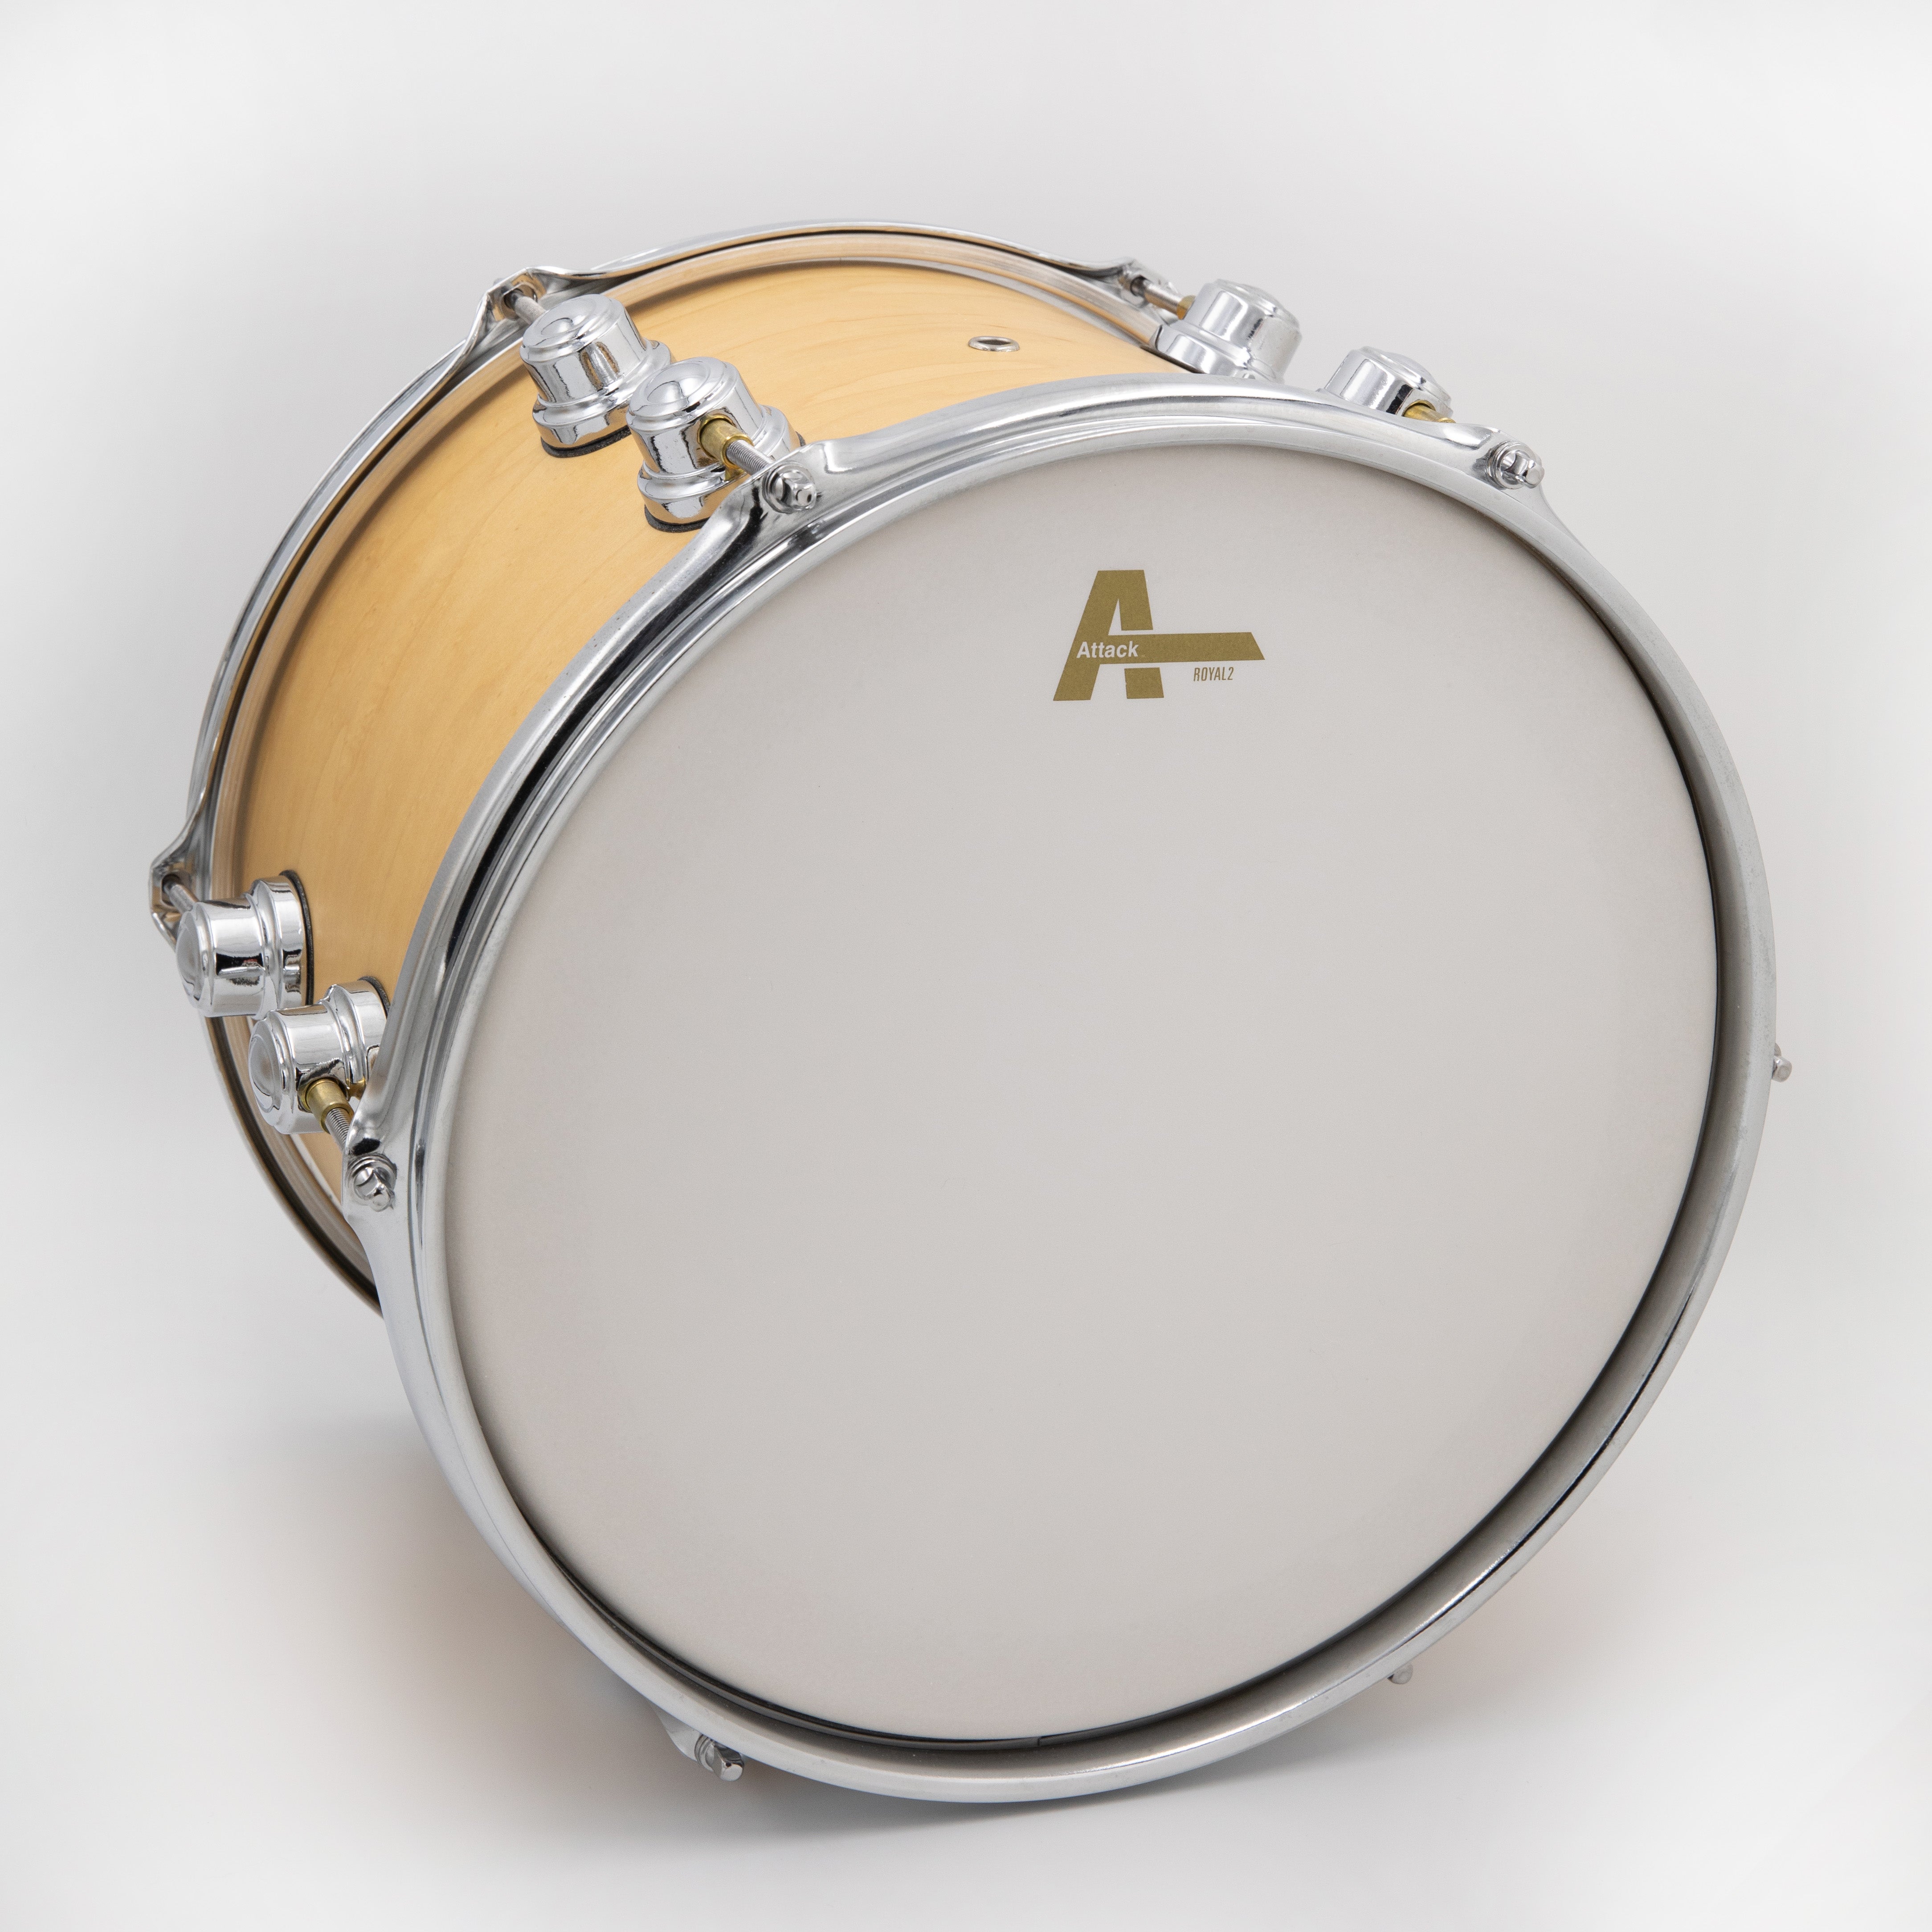 Attack Royal 2 8" 2-Ply Medium Clear S Film Drumhead - Coated